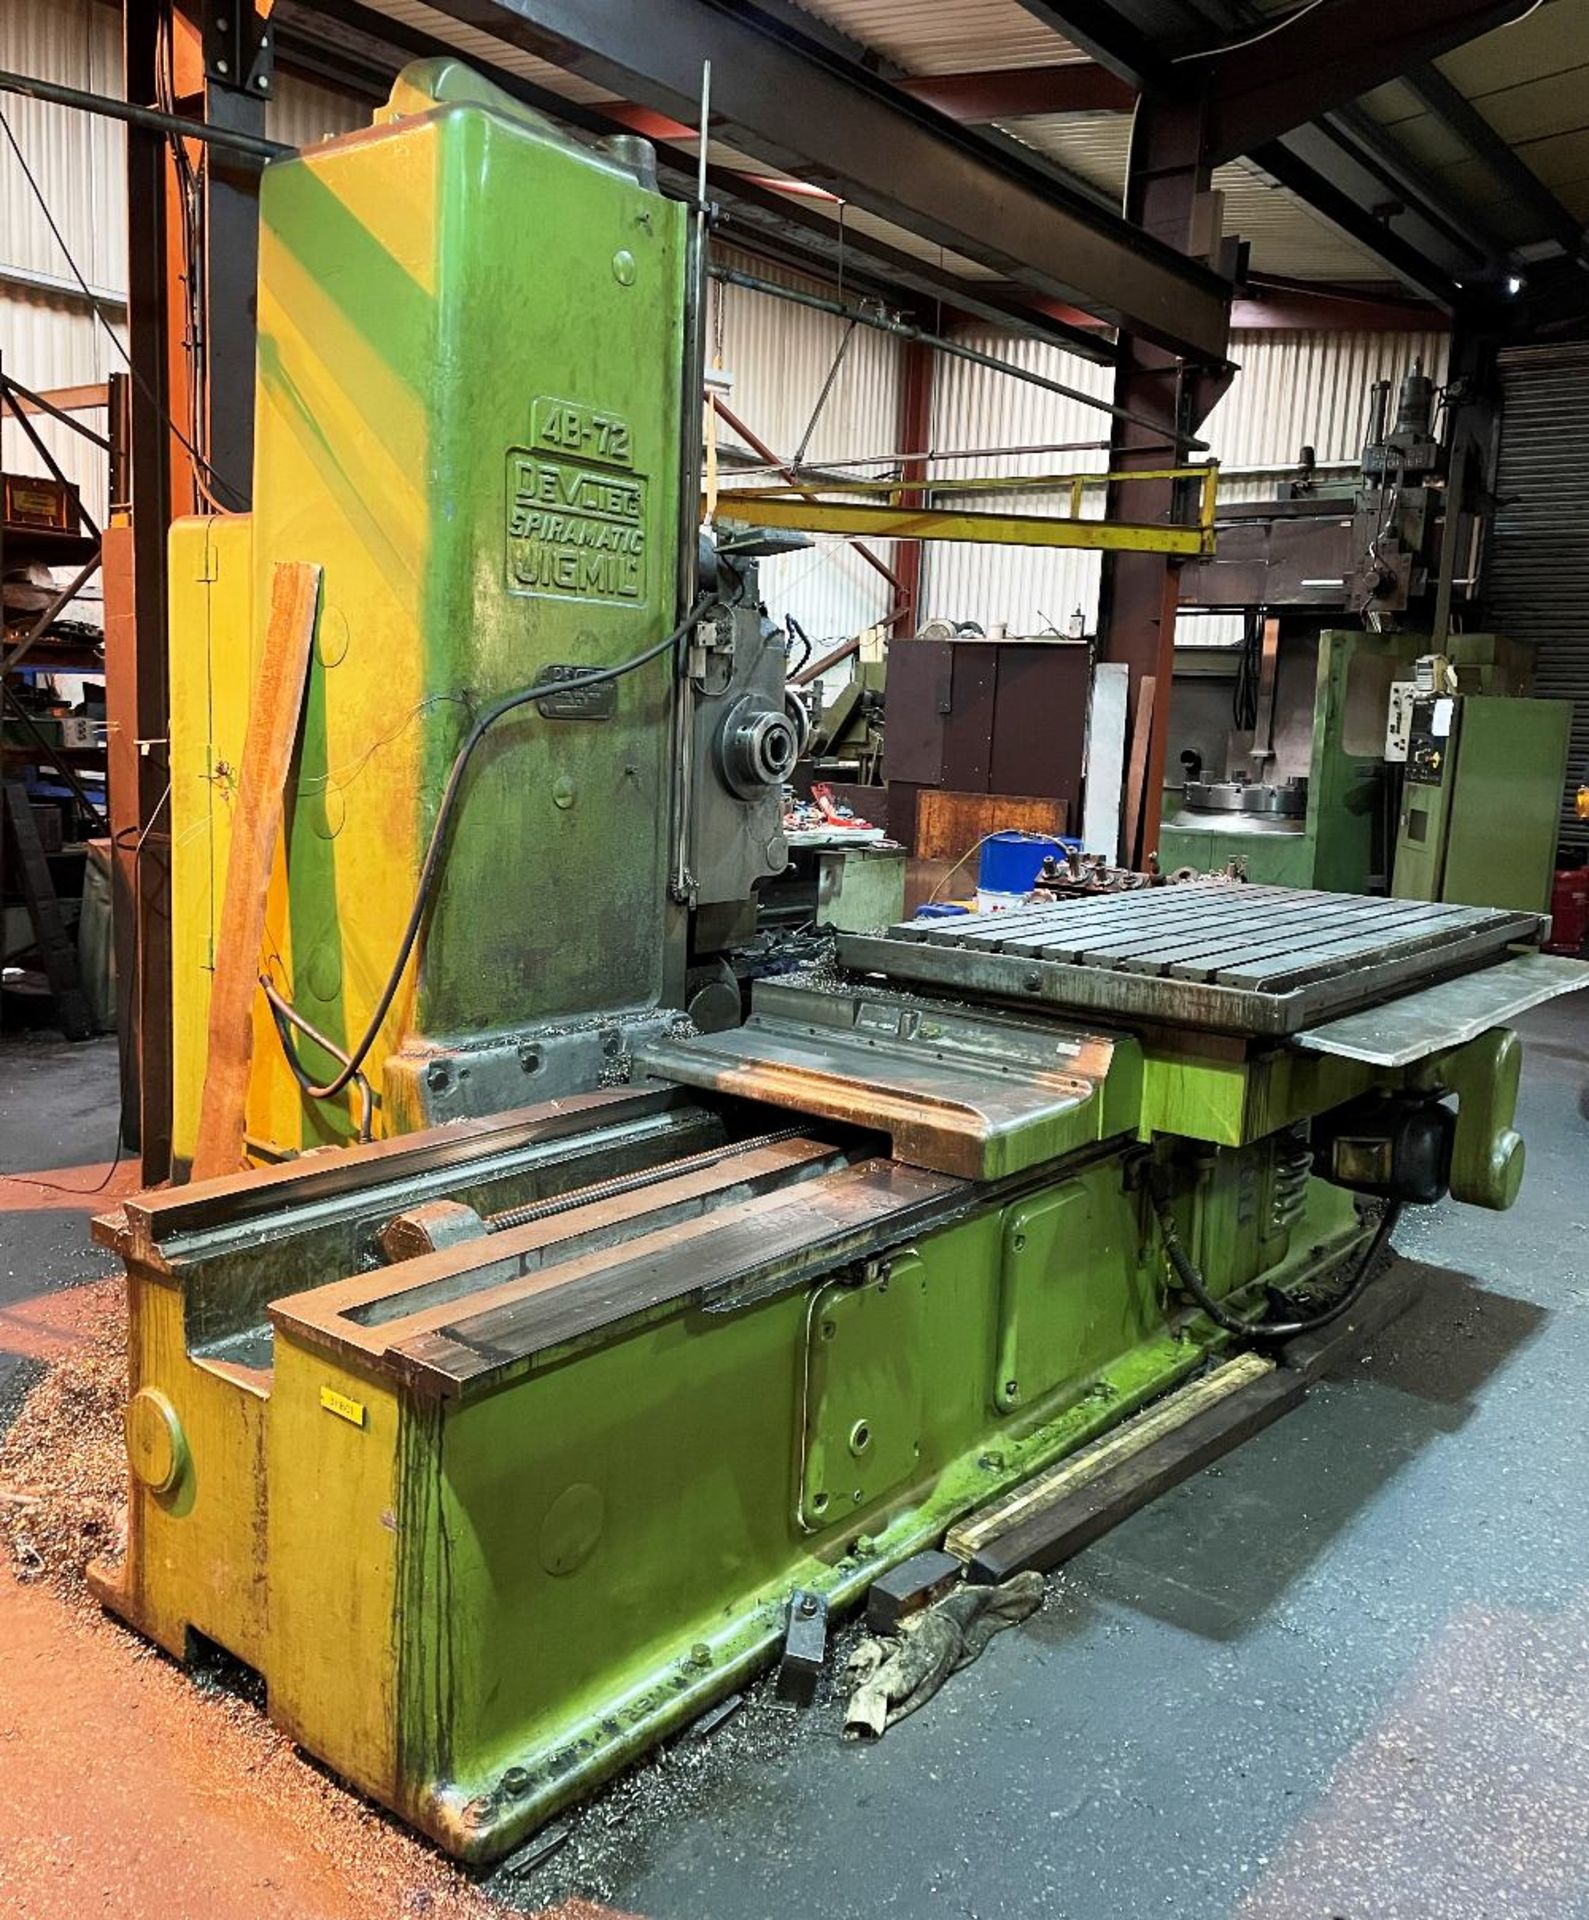 Herbert Devlieg Spiramatic 4B-72 Jig Mill w/ Tooling - As Pictured - Image 2 of 9